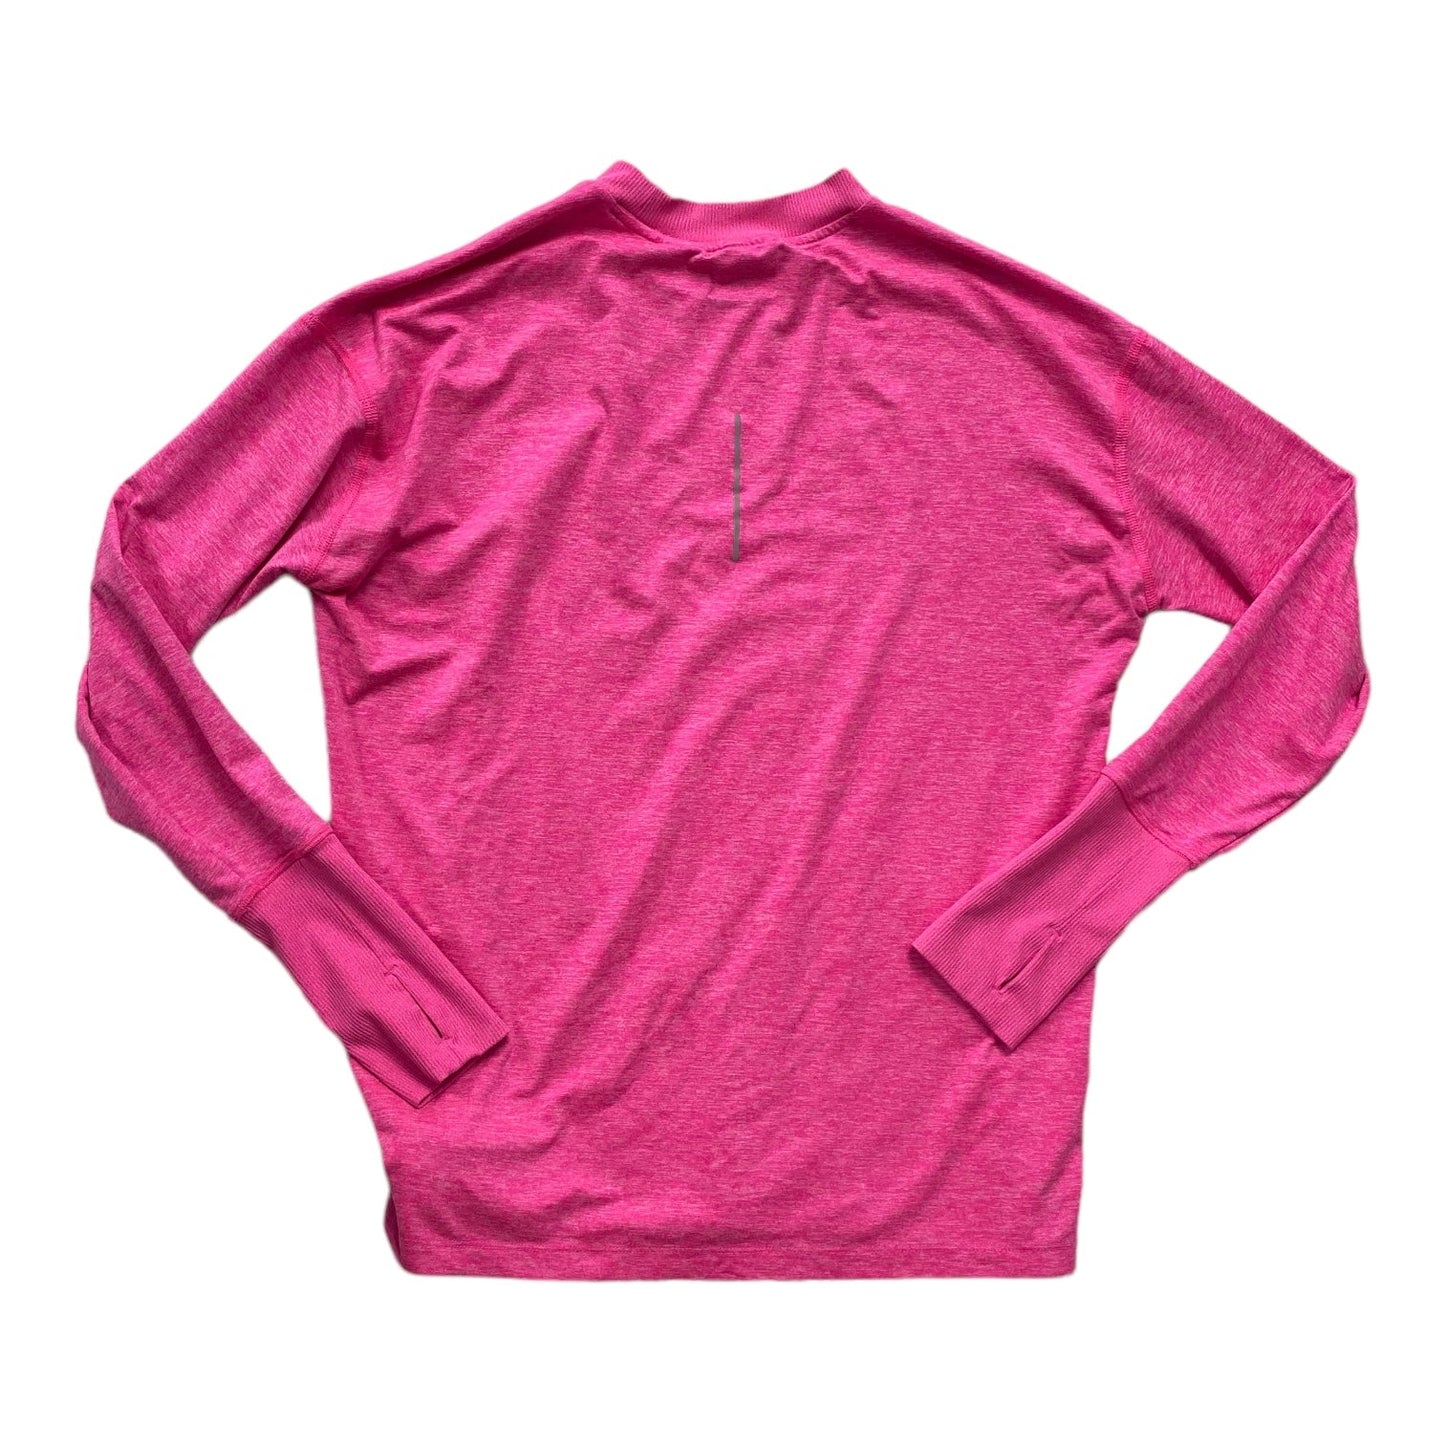 Pink Athletic Top Long Sleeve Crewneck Nike, Size M